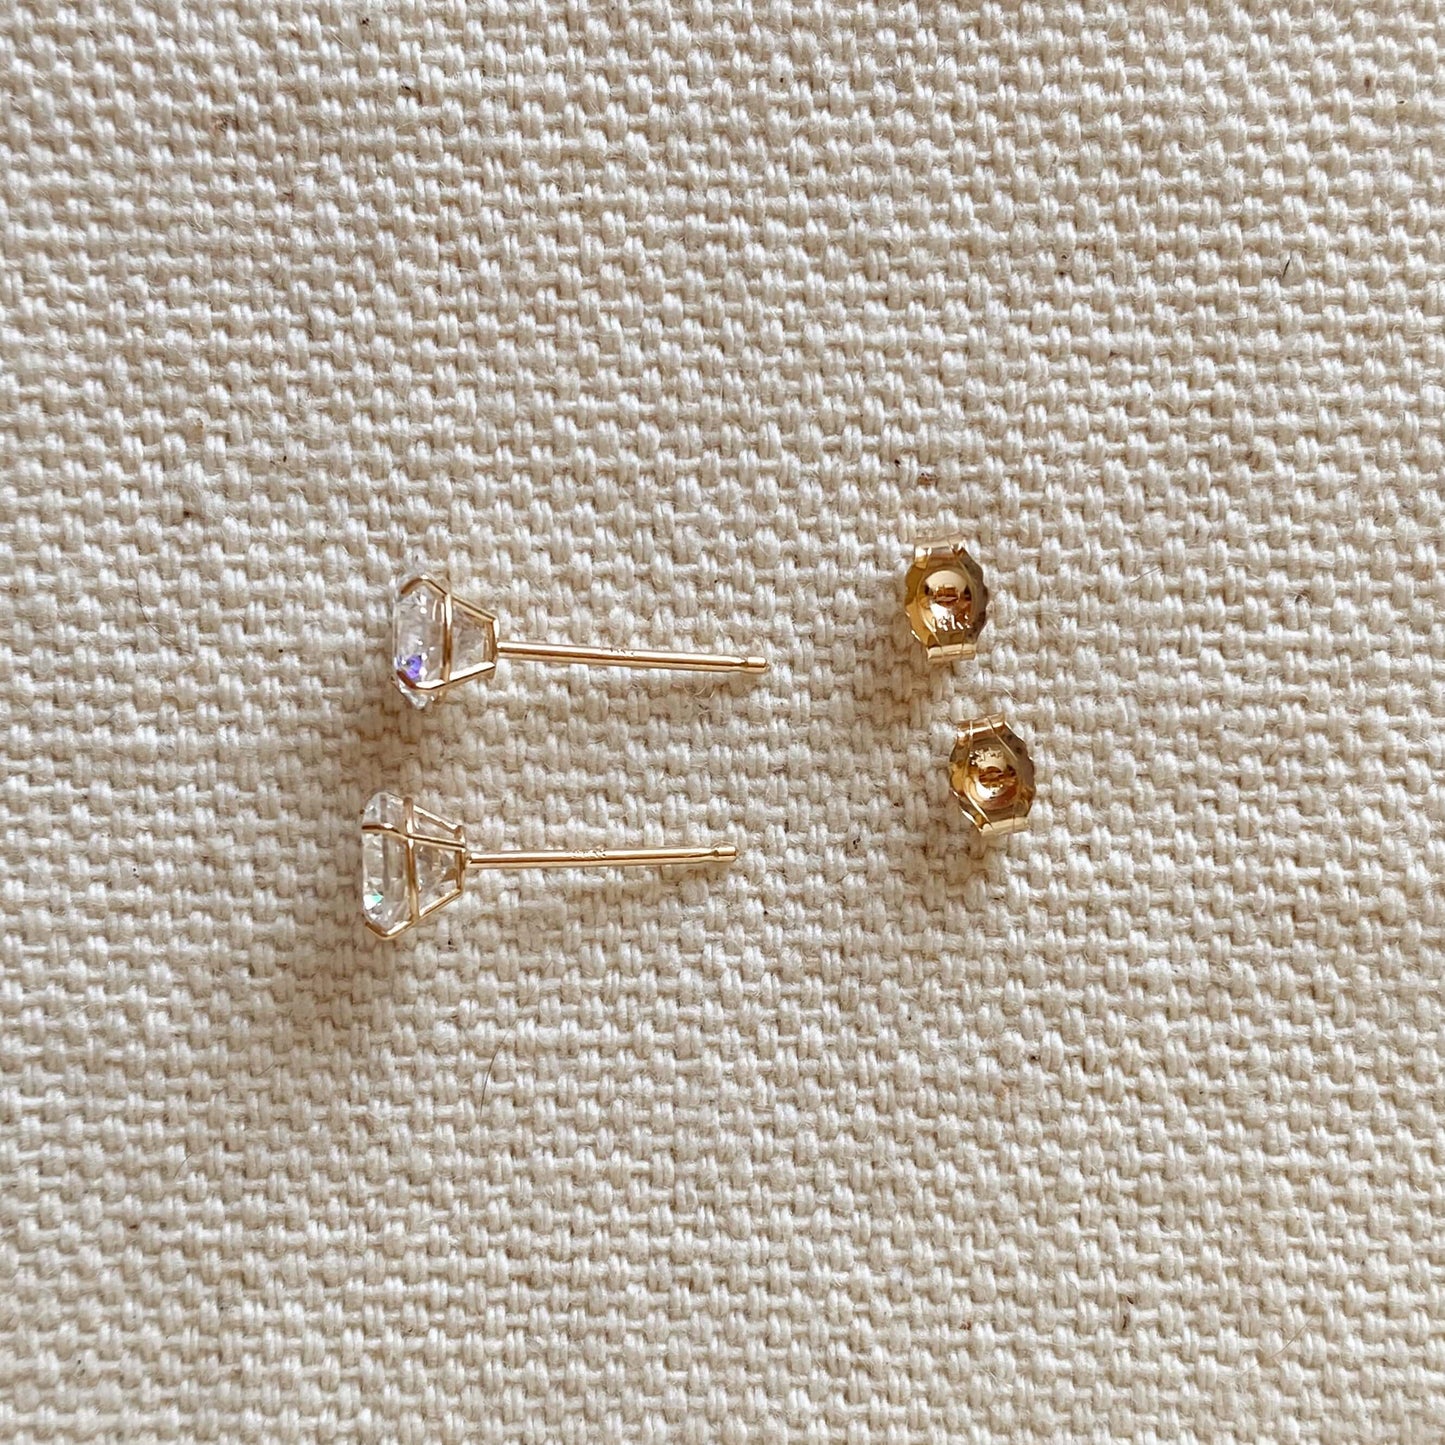 GoldFi 14k Solid Gold Round 5mm Cubic Zirconia Stud Earrings